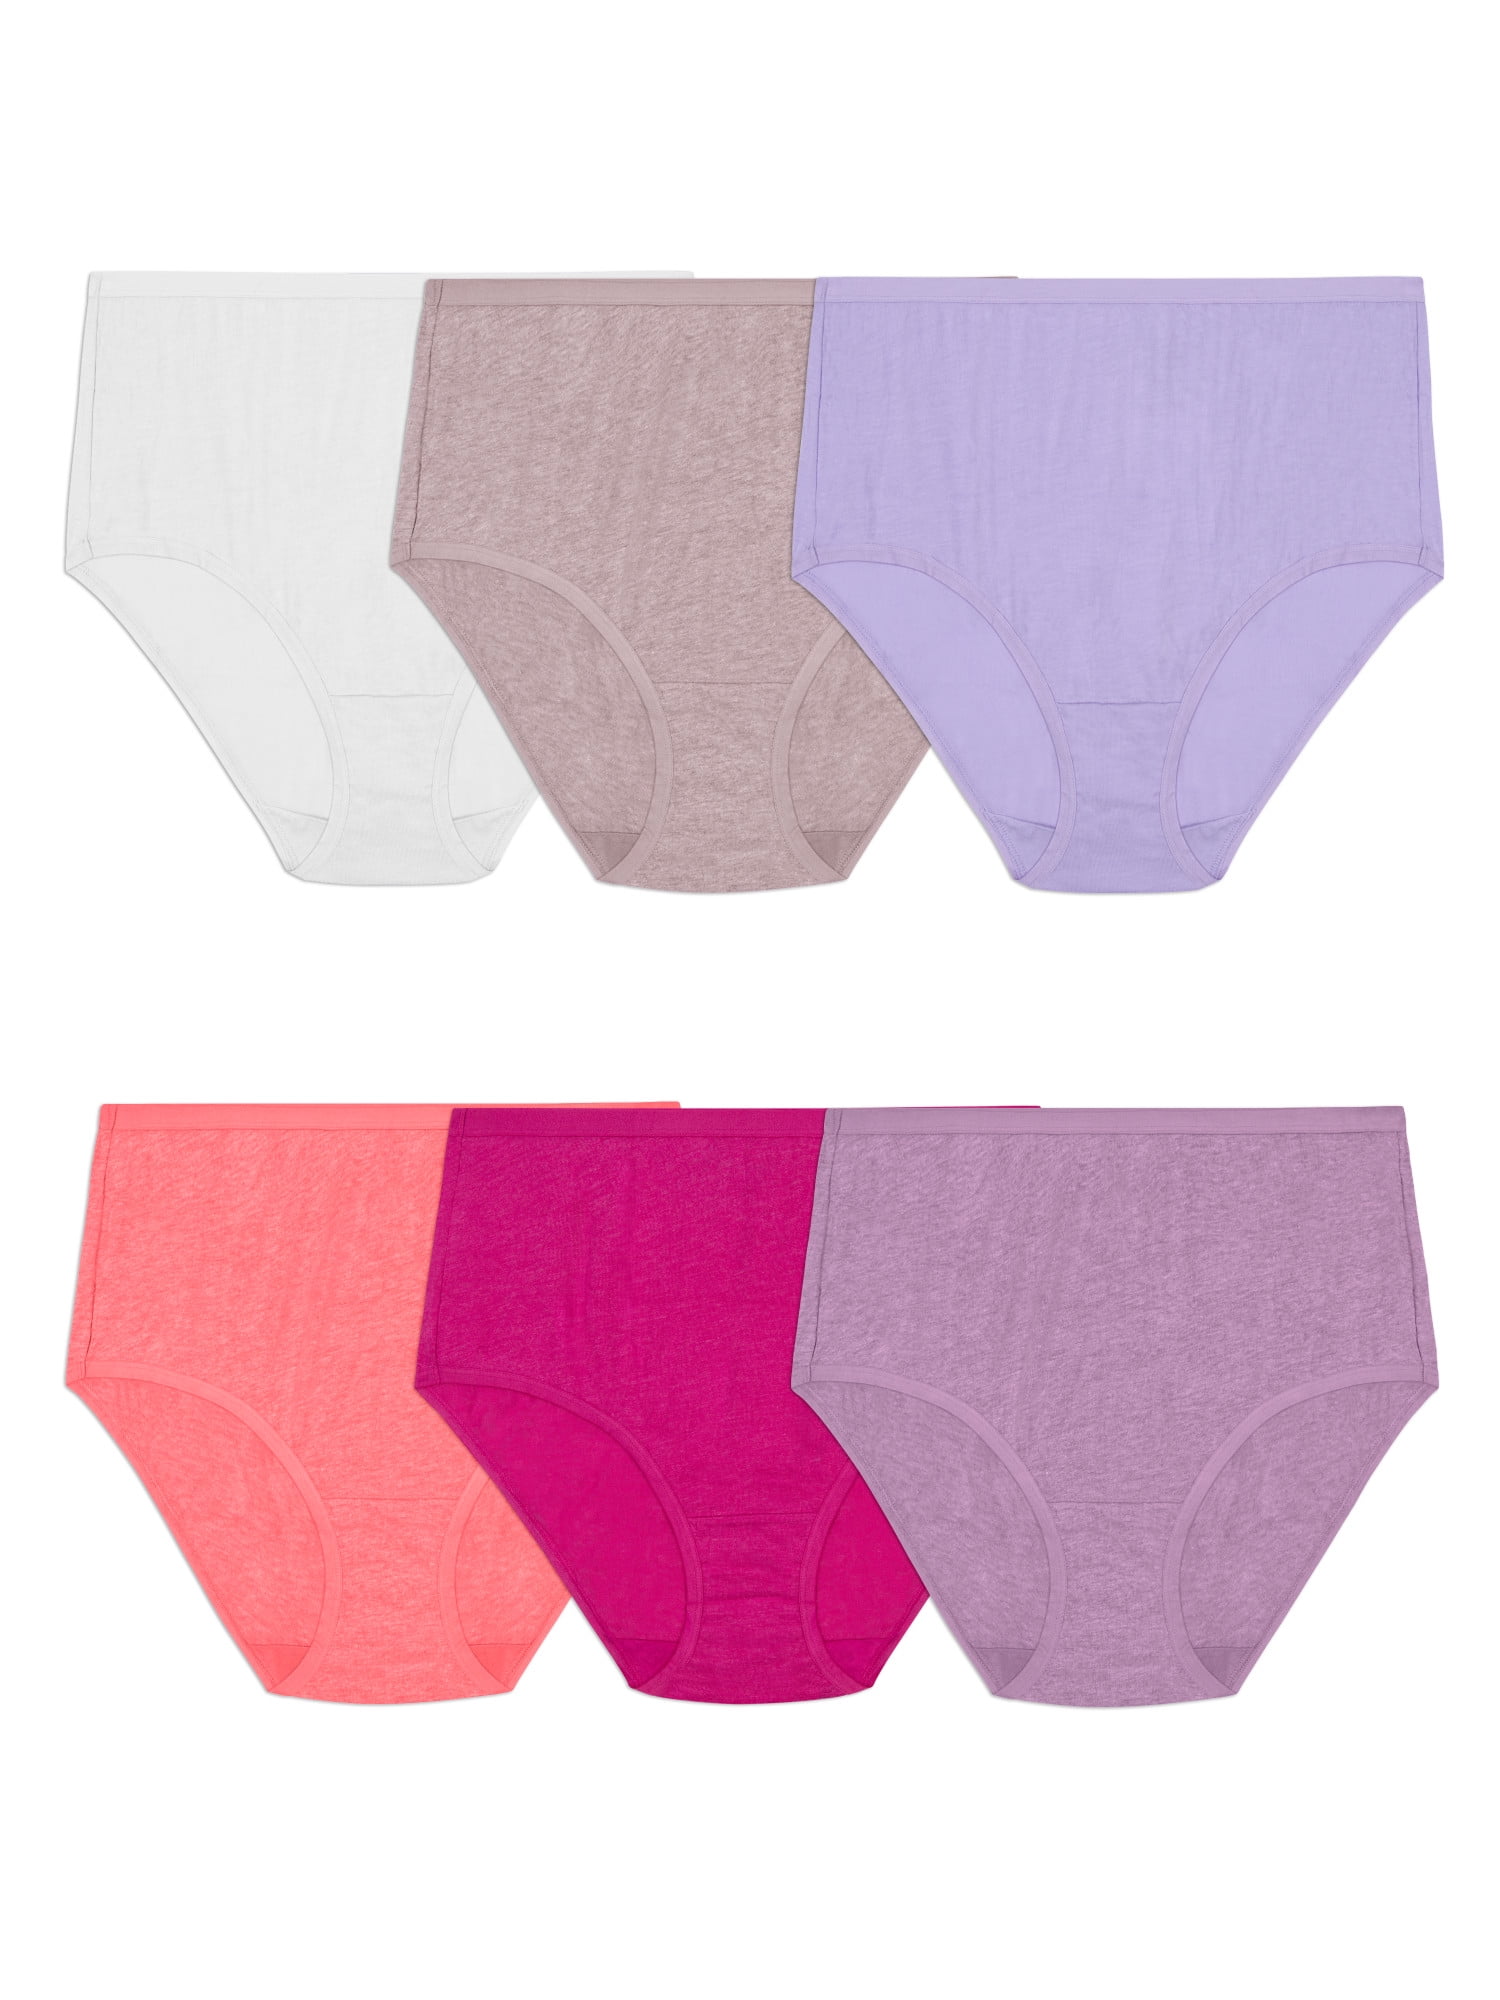 Panties Assorted Colors Women Innerwear Solid Hipster Brief Panty OE - Pack  of 10, Mid at Rs 45.5/piece in Tiruppur